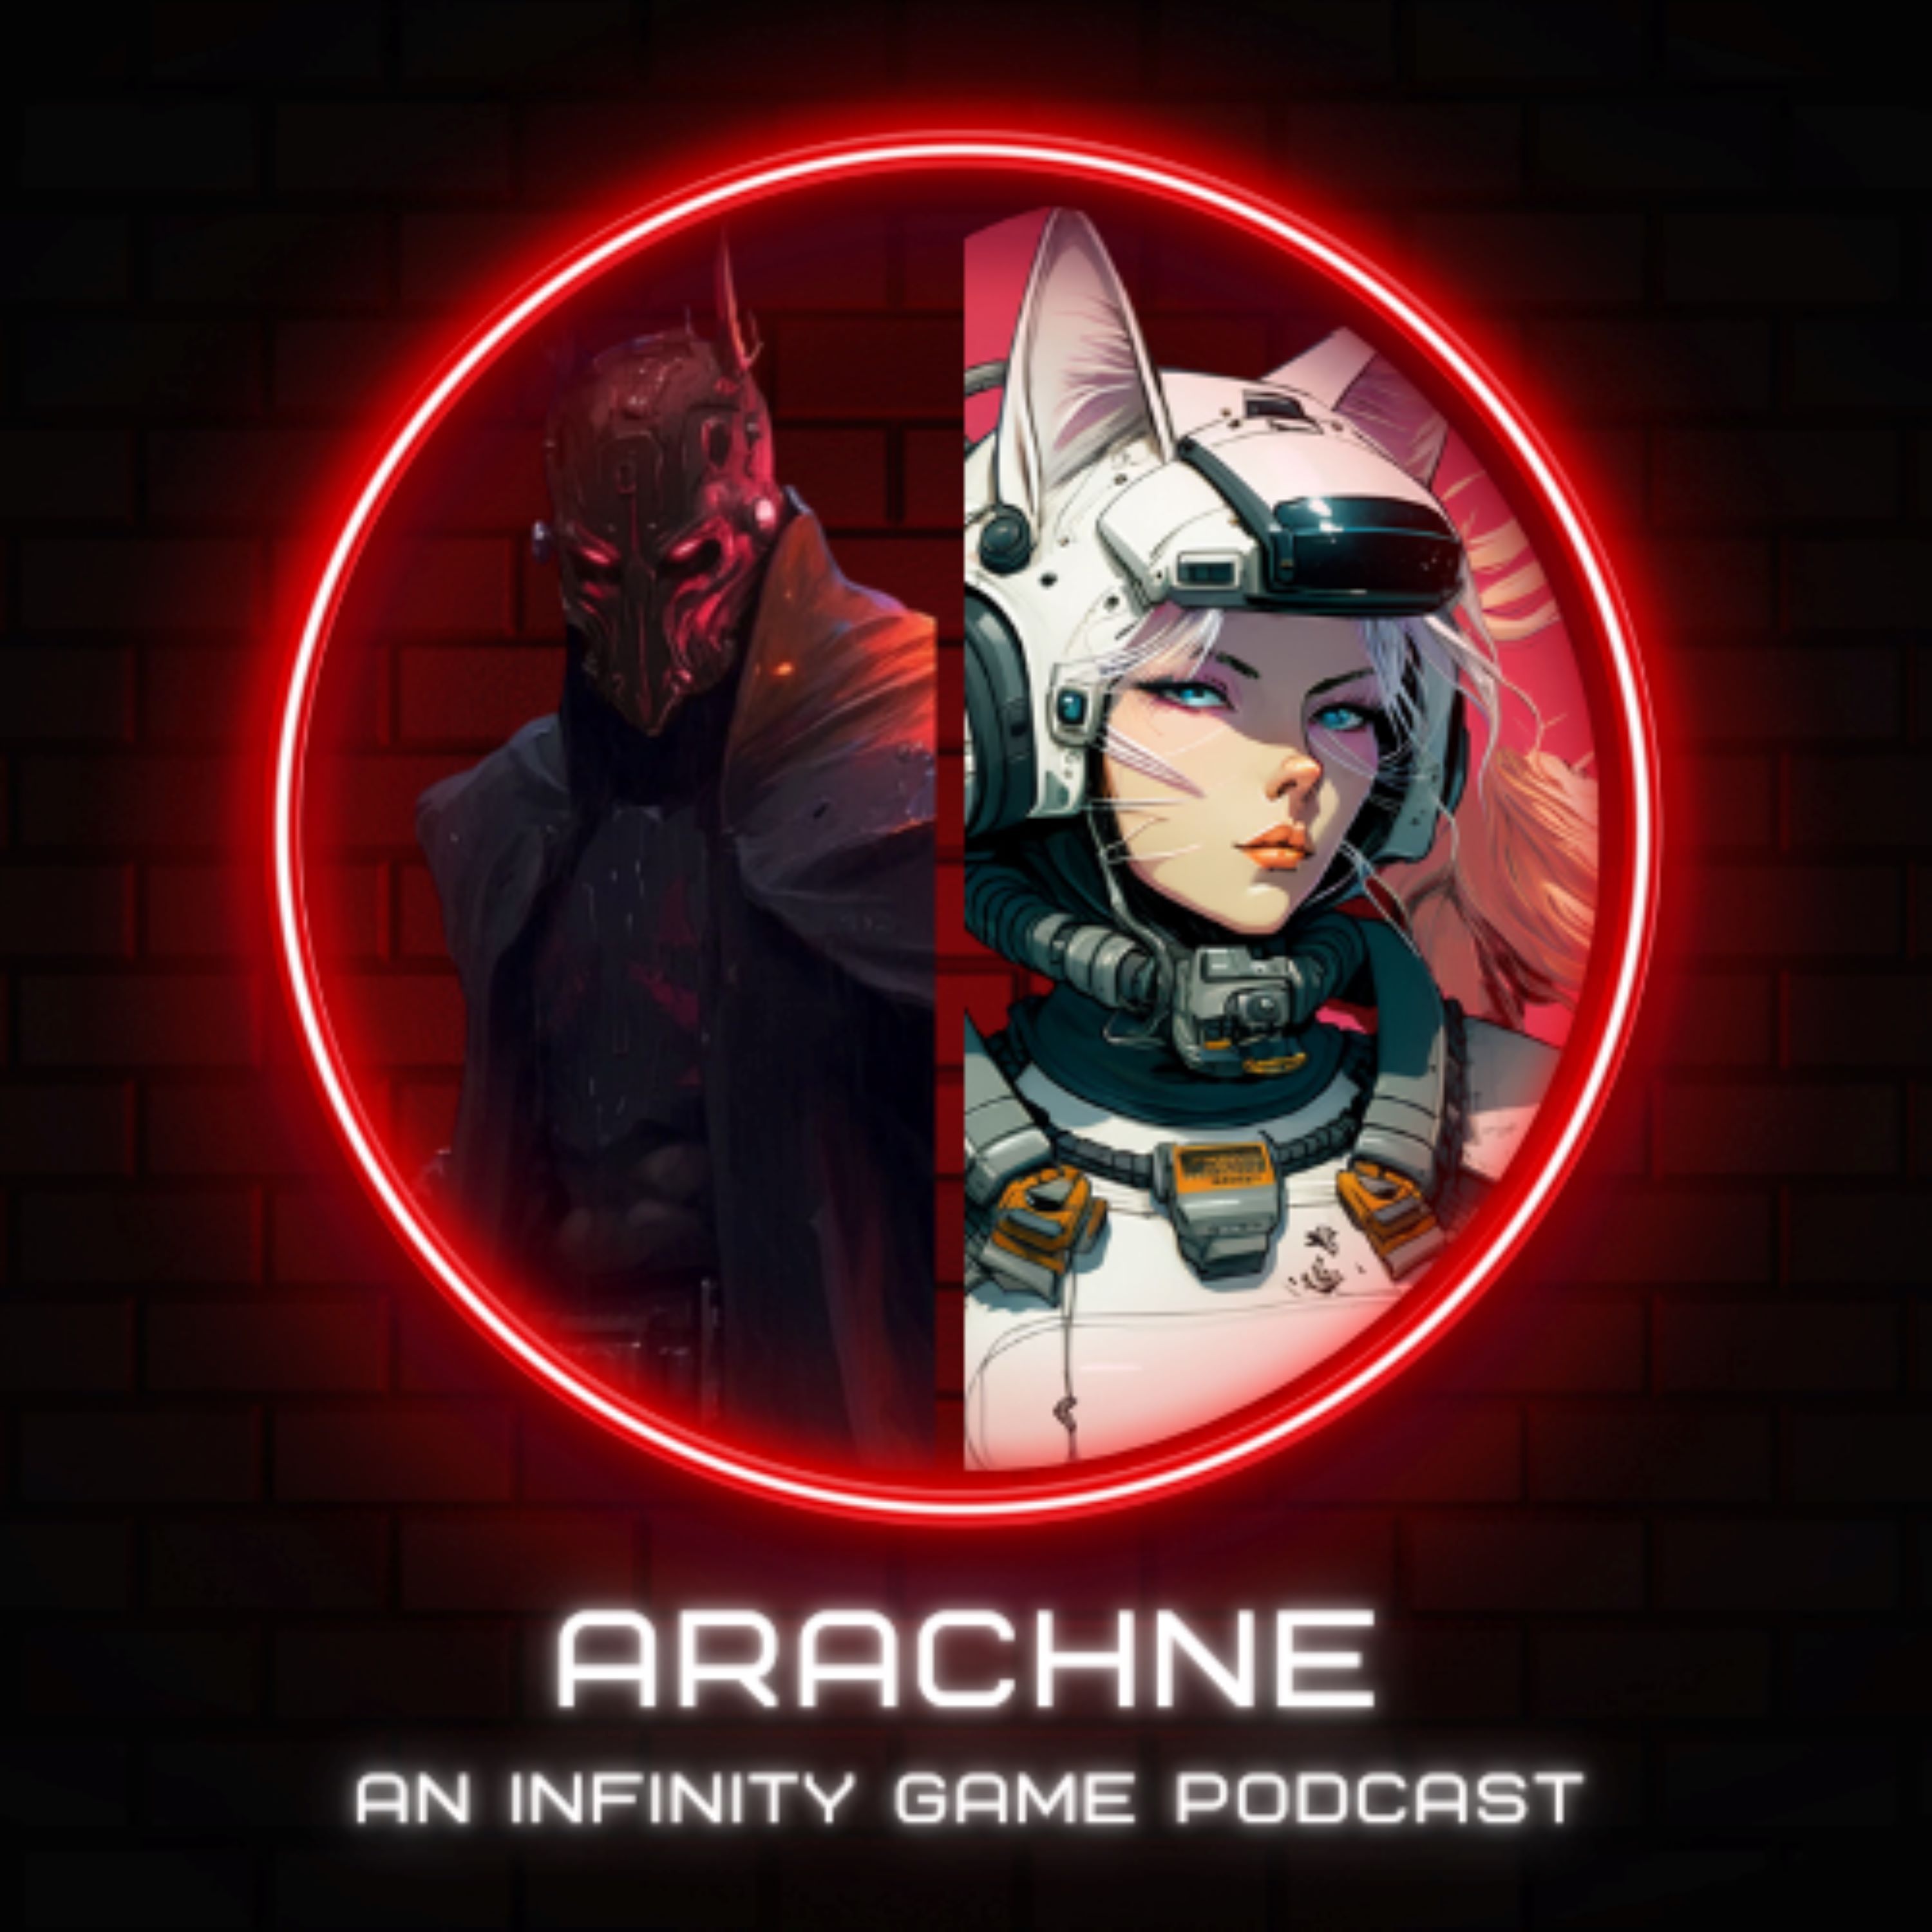 Artwork for podcast Arachne: An Infinity Game Podcast